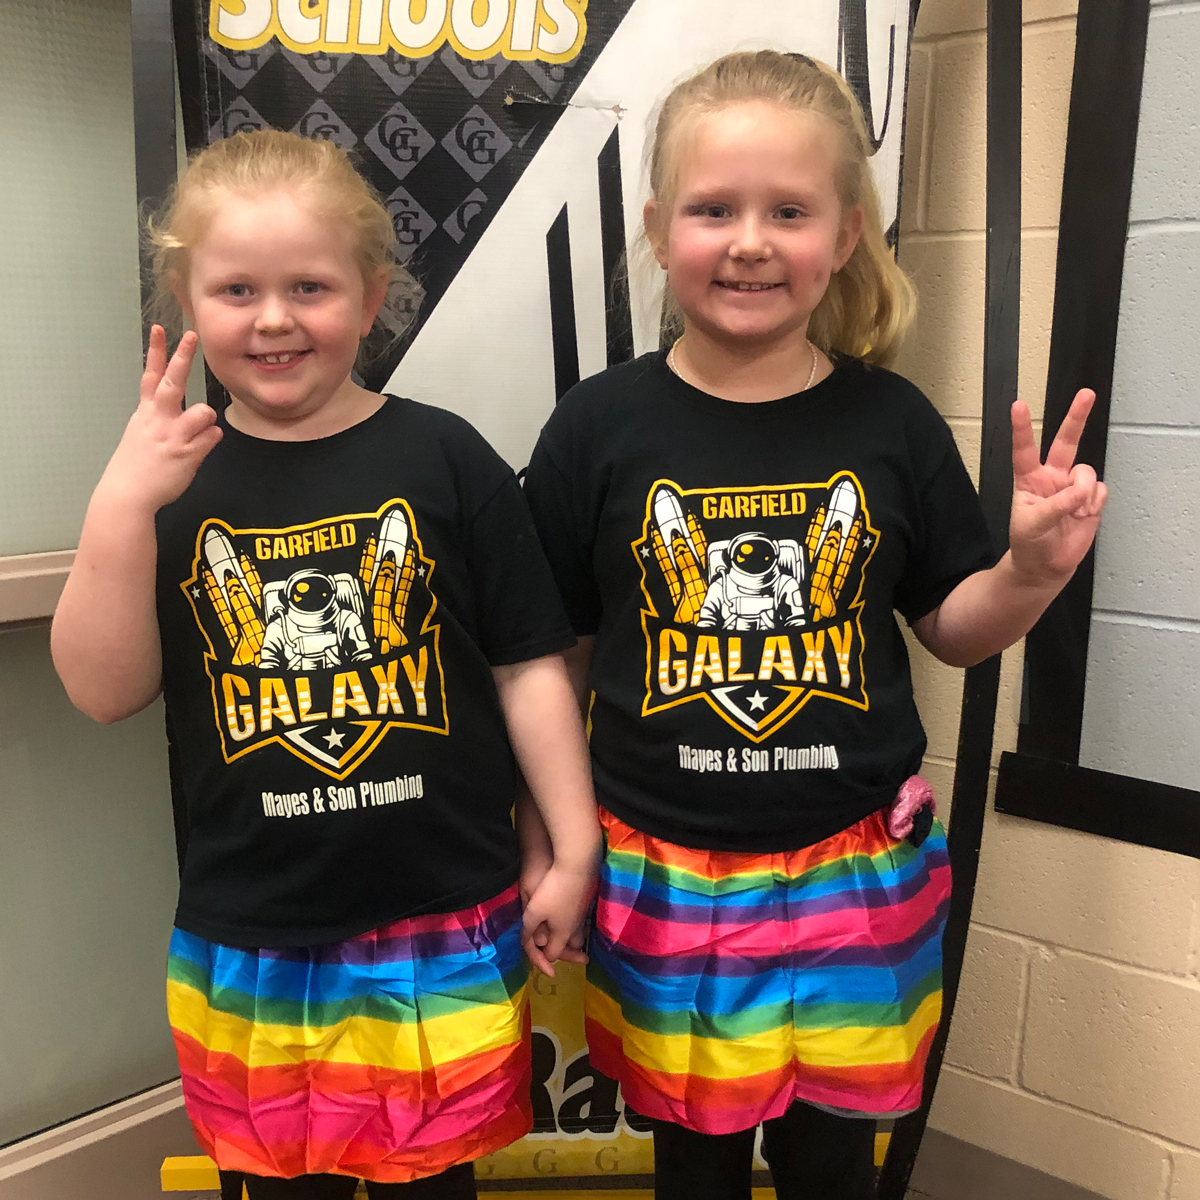 Two elementary students wearing black and gold shirts stand in front of the Excellence banner.